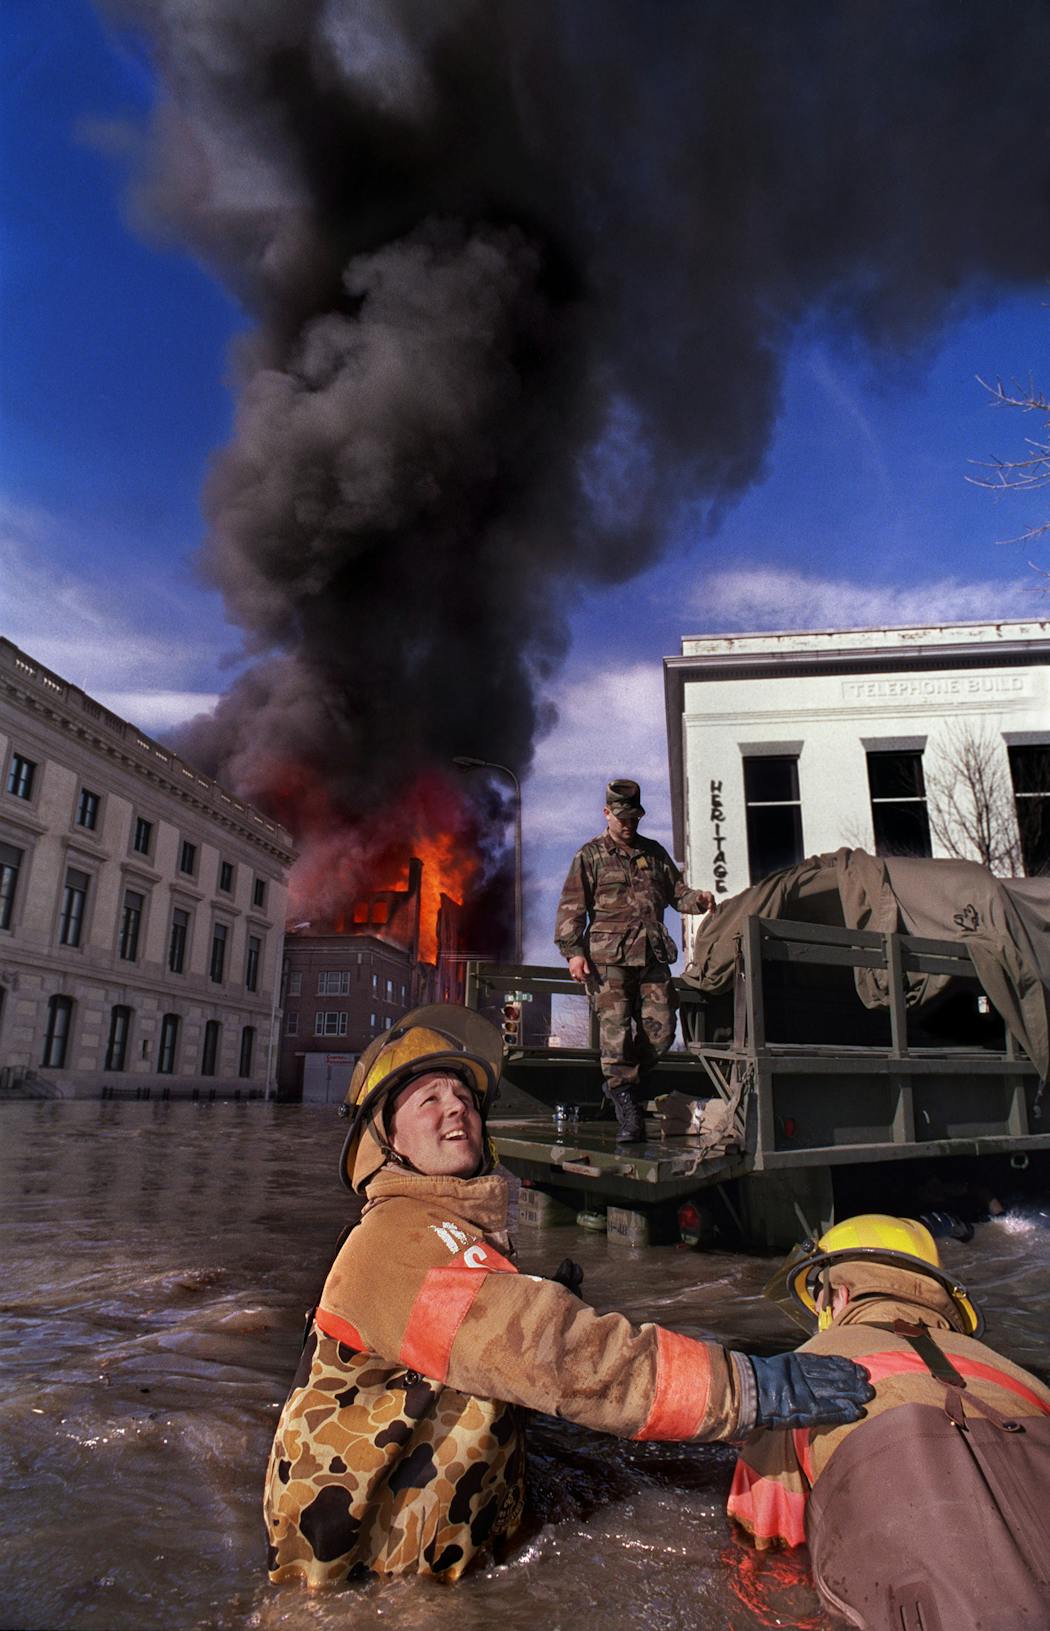 In 1997, Alkofer took this photo of Grand Forks firefighters Mike Sandie, left, and Randy Johnson battling a fire that destroyed a building in flooded downtown Grand Forks.